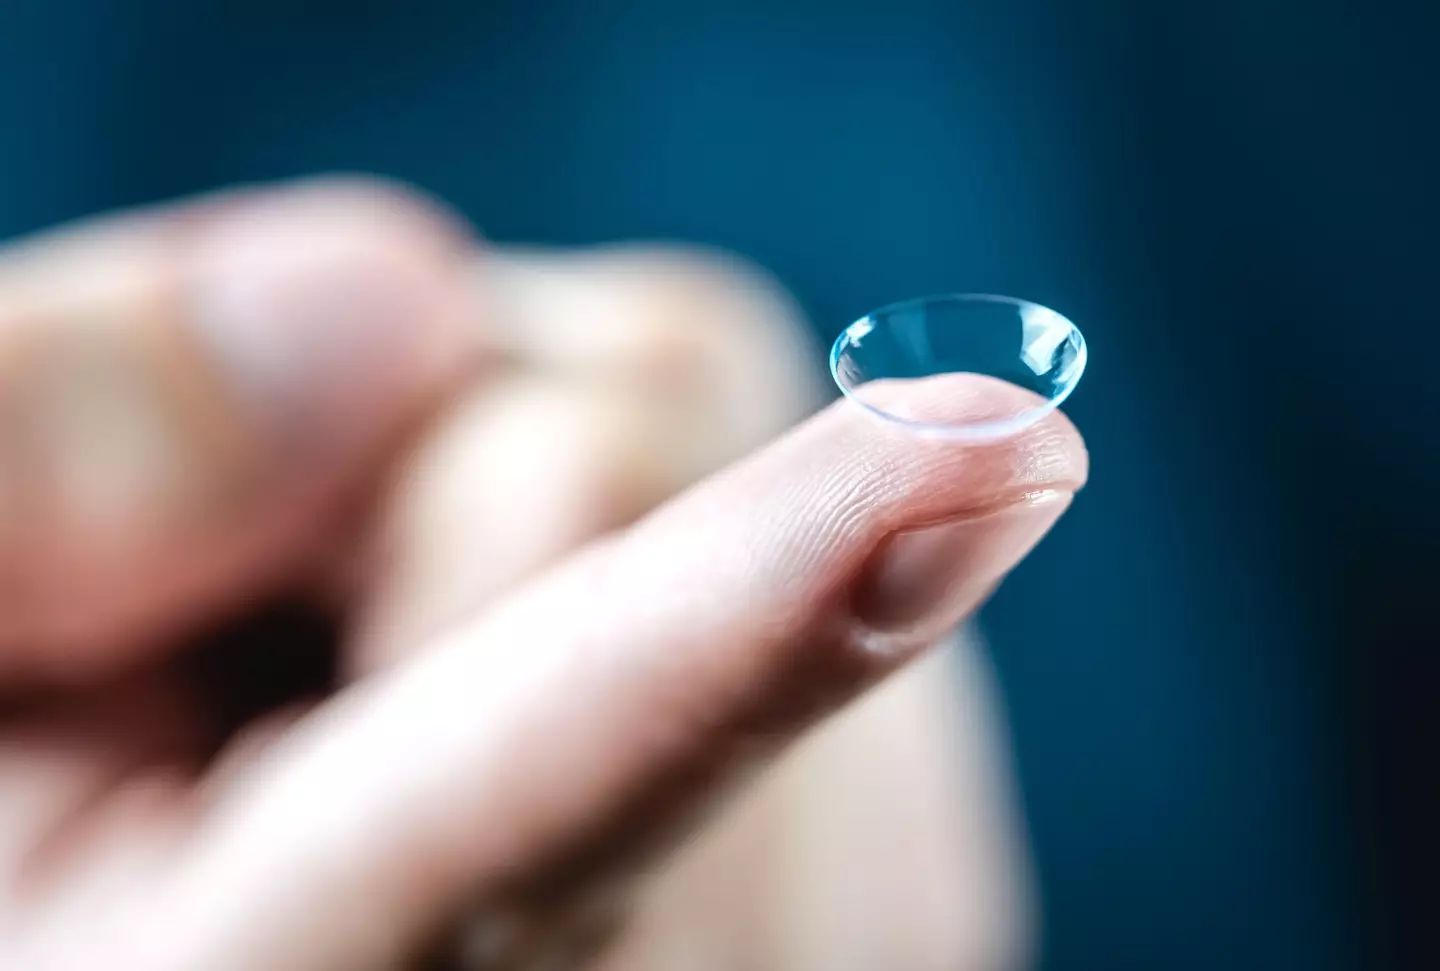 There are certainly better ways to dispose of your contact lenses.